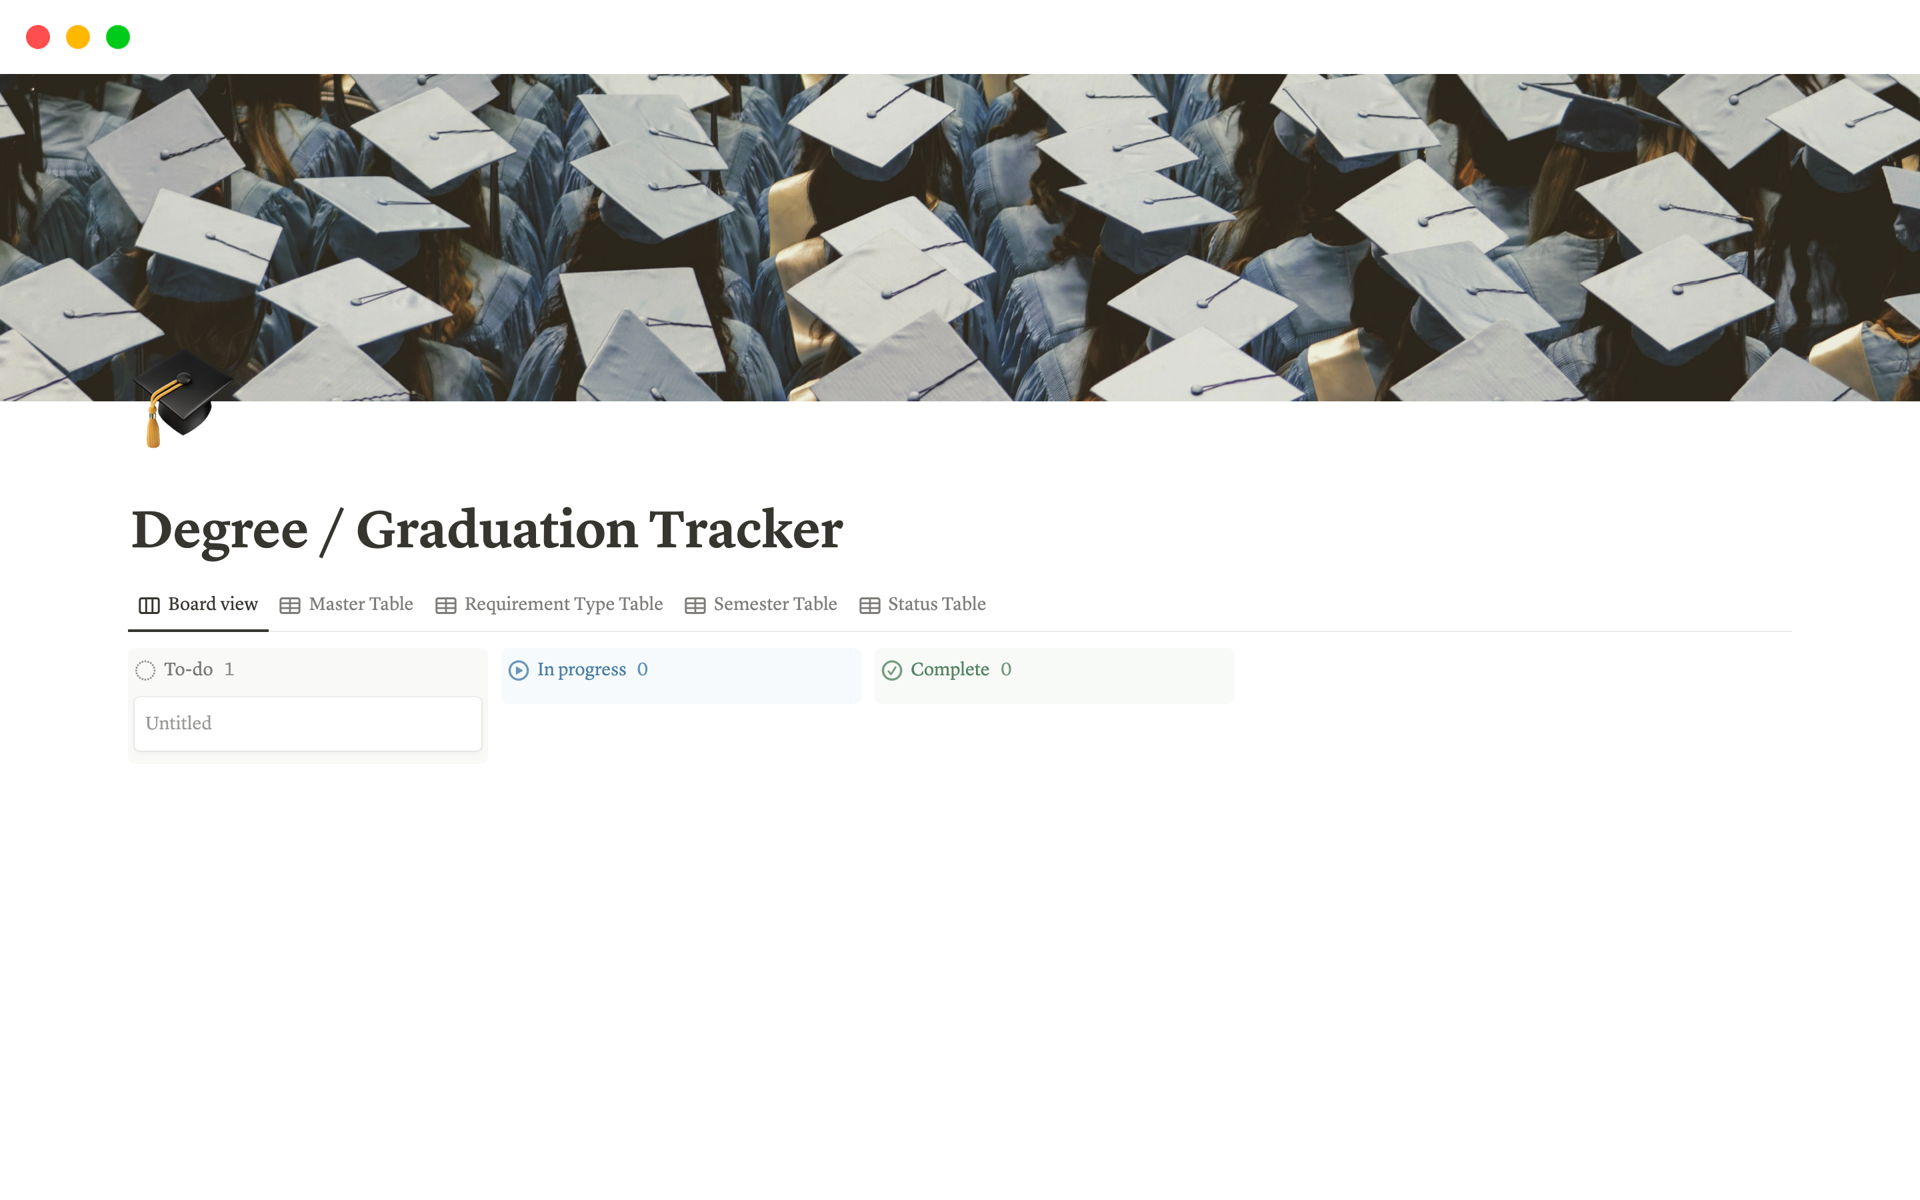 Streamline your degree progress with the Notion Degree Tracker.